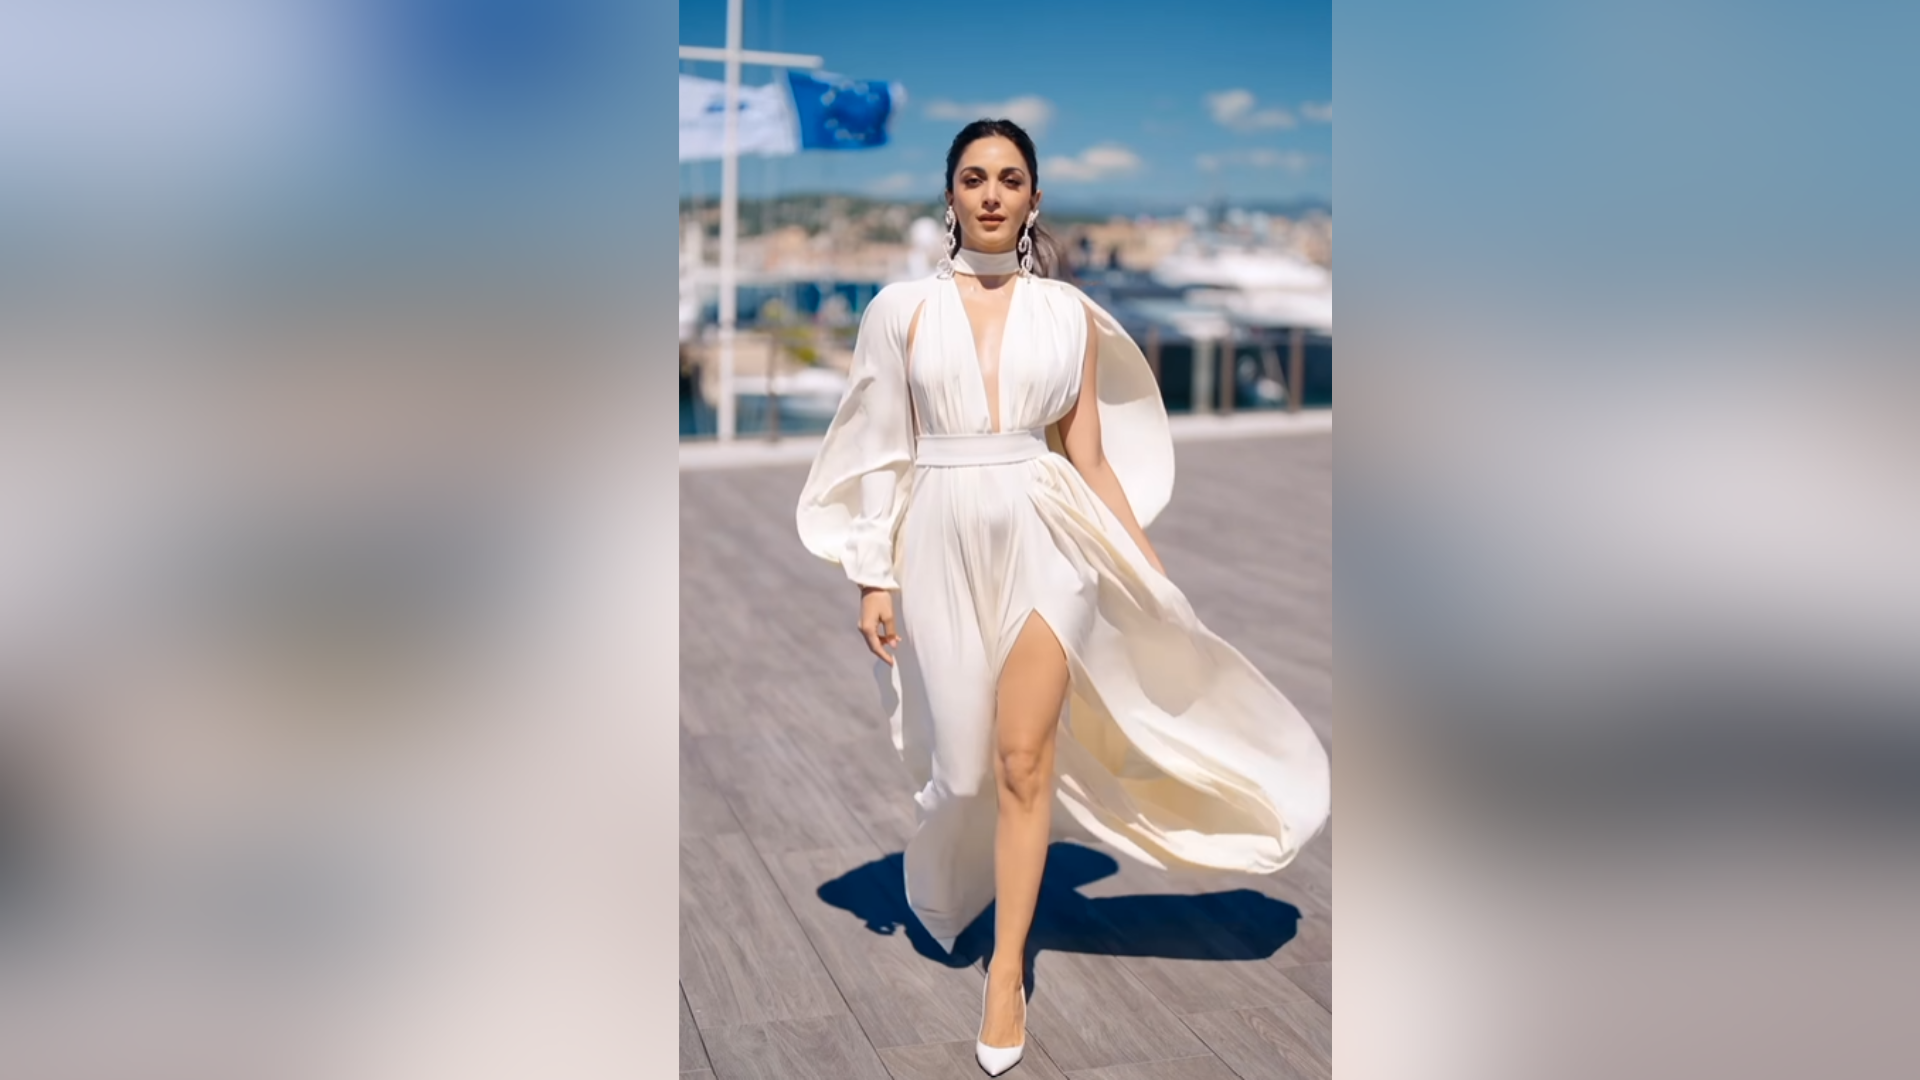 Kiara Advani Wows In Ivory Attire Before Cannes Debut